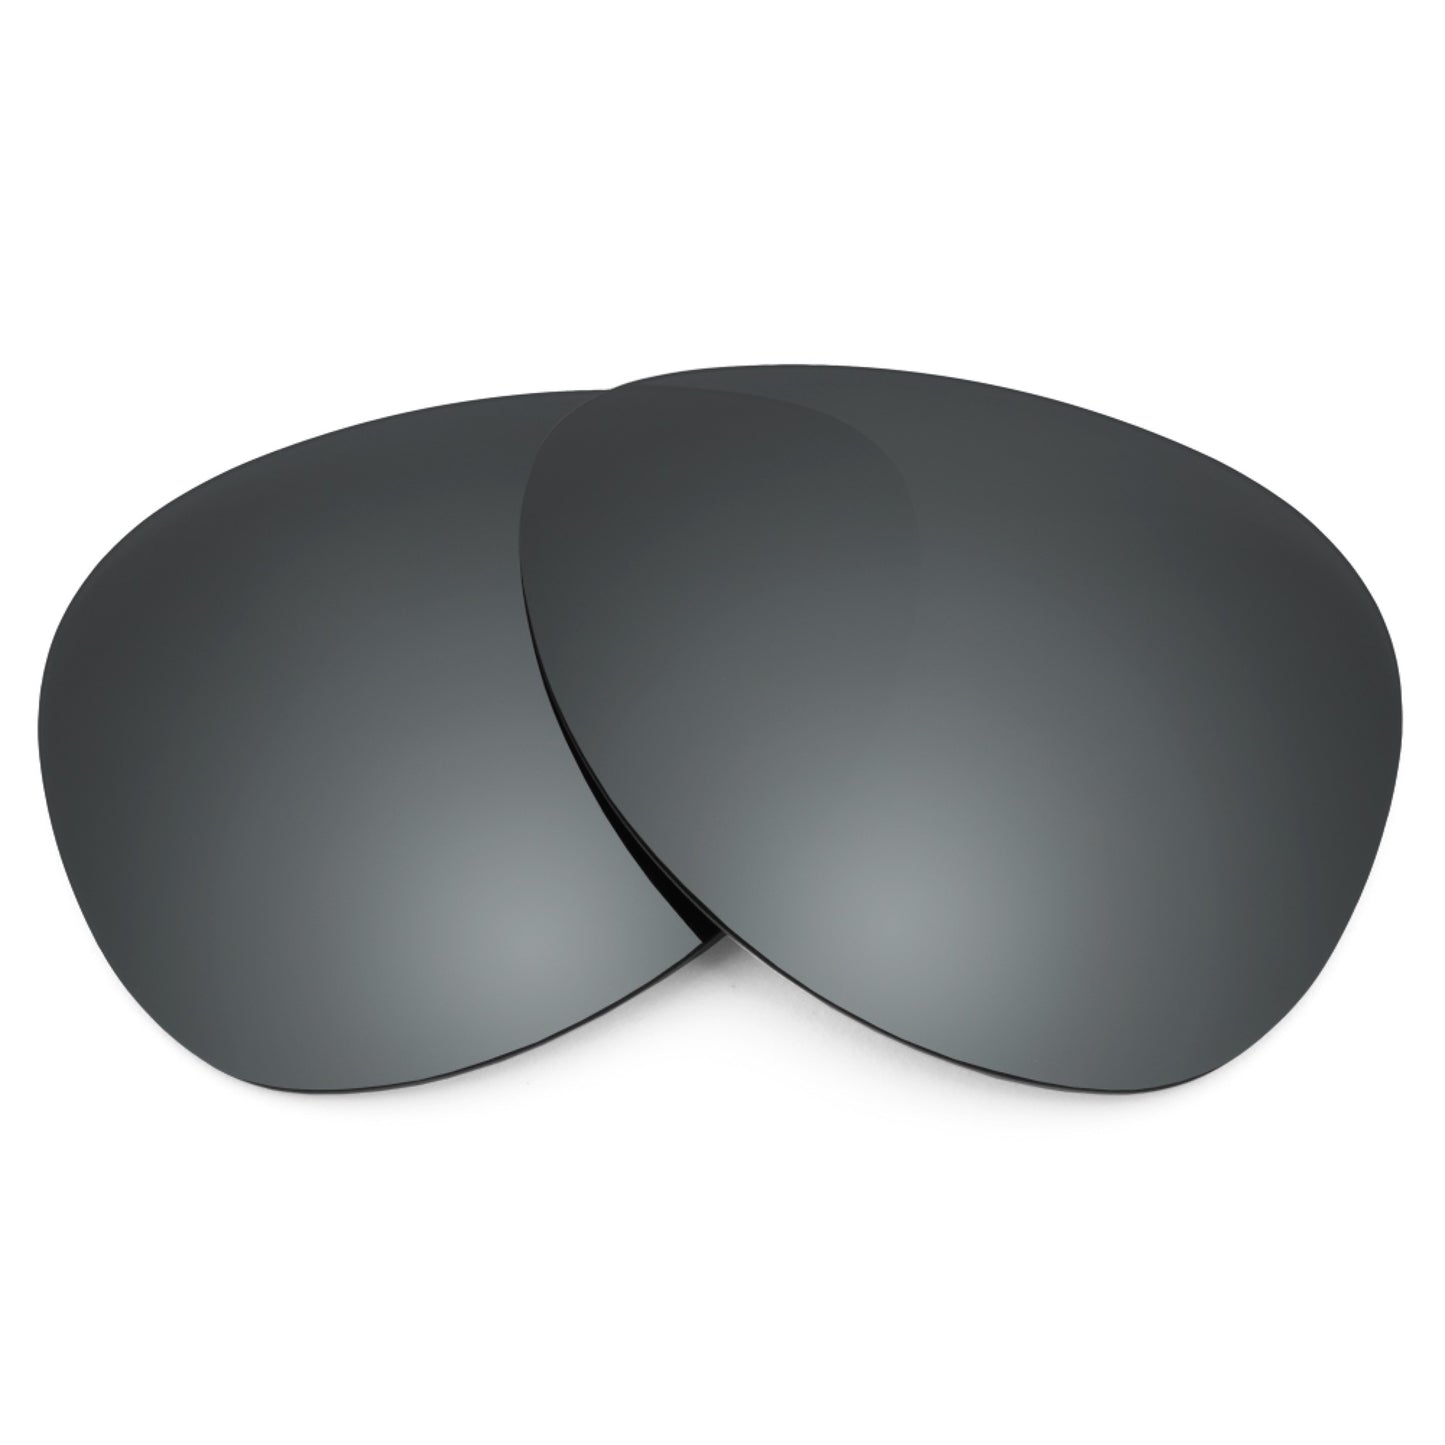 Revant replacement lenses for Ray-Ban Cockpit RB3362 59mm Non-Polarized Black Chrome